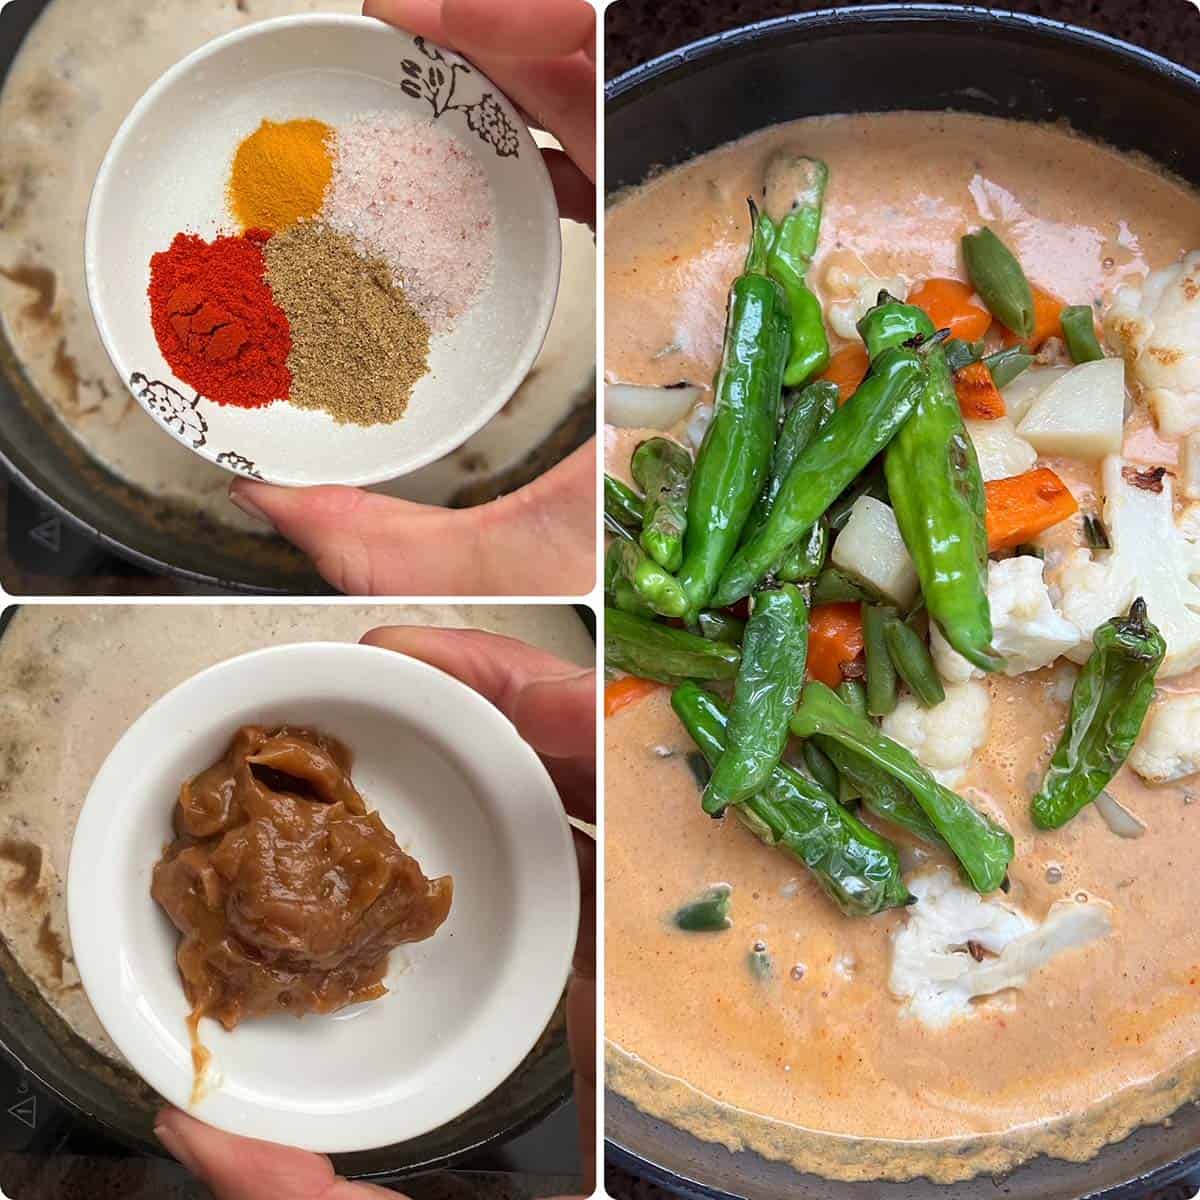 3 panel photo showing the making of the curry.